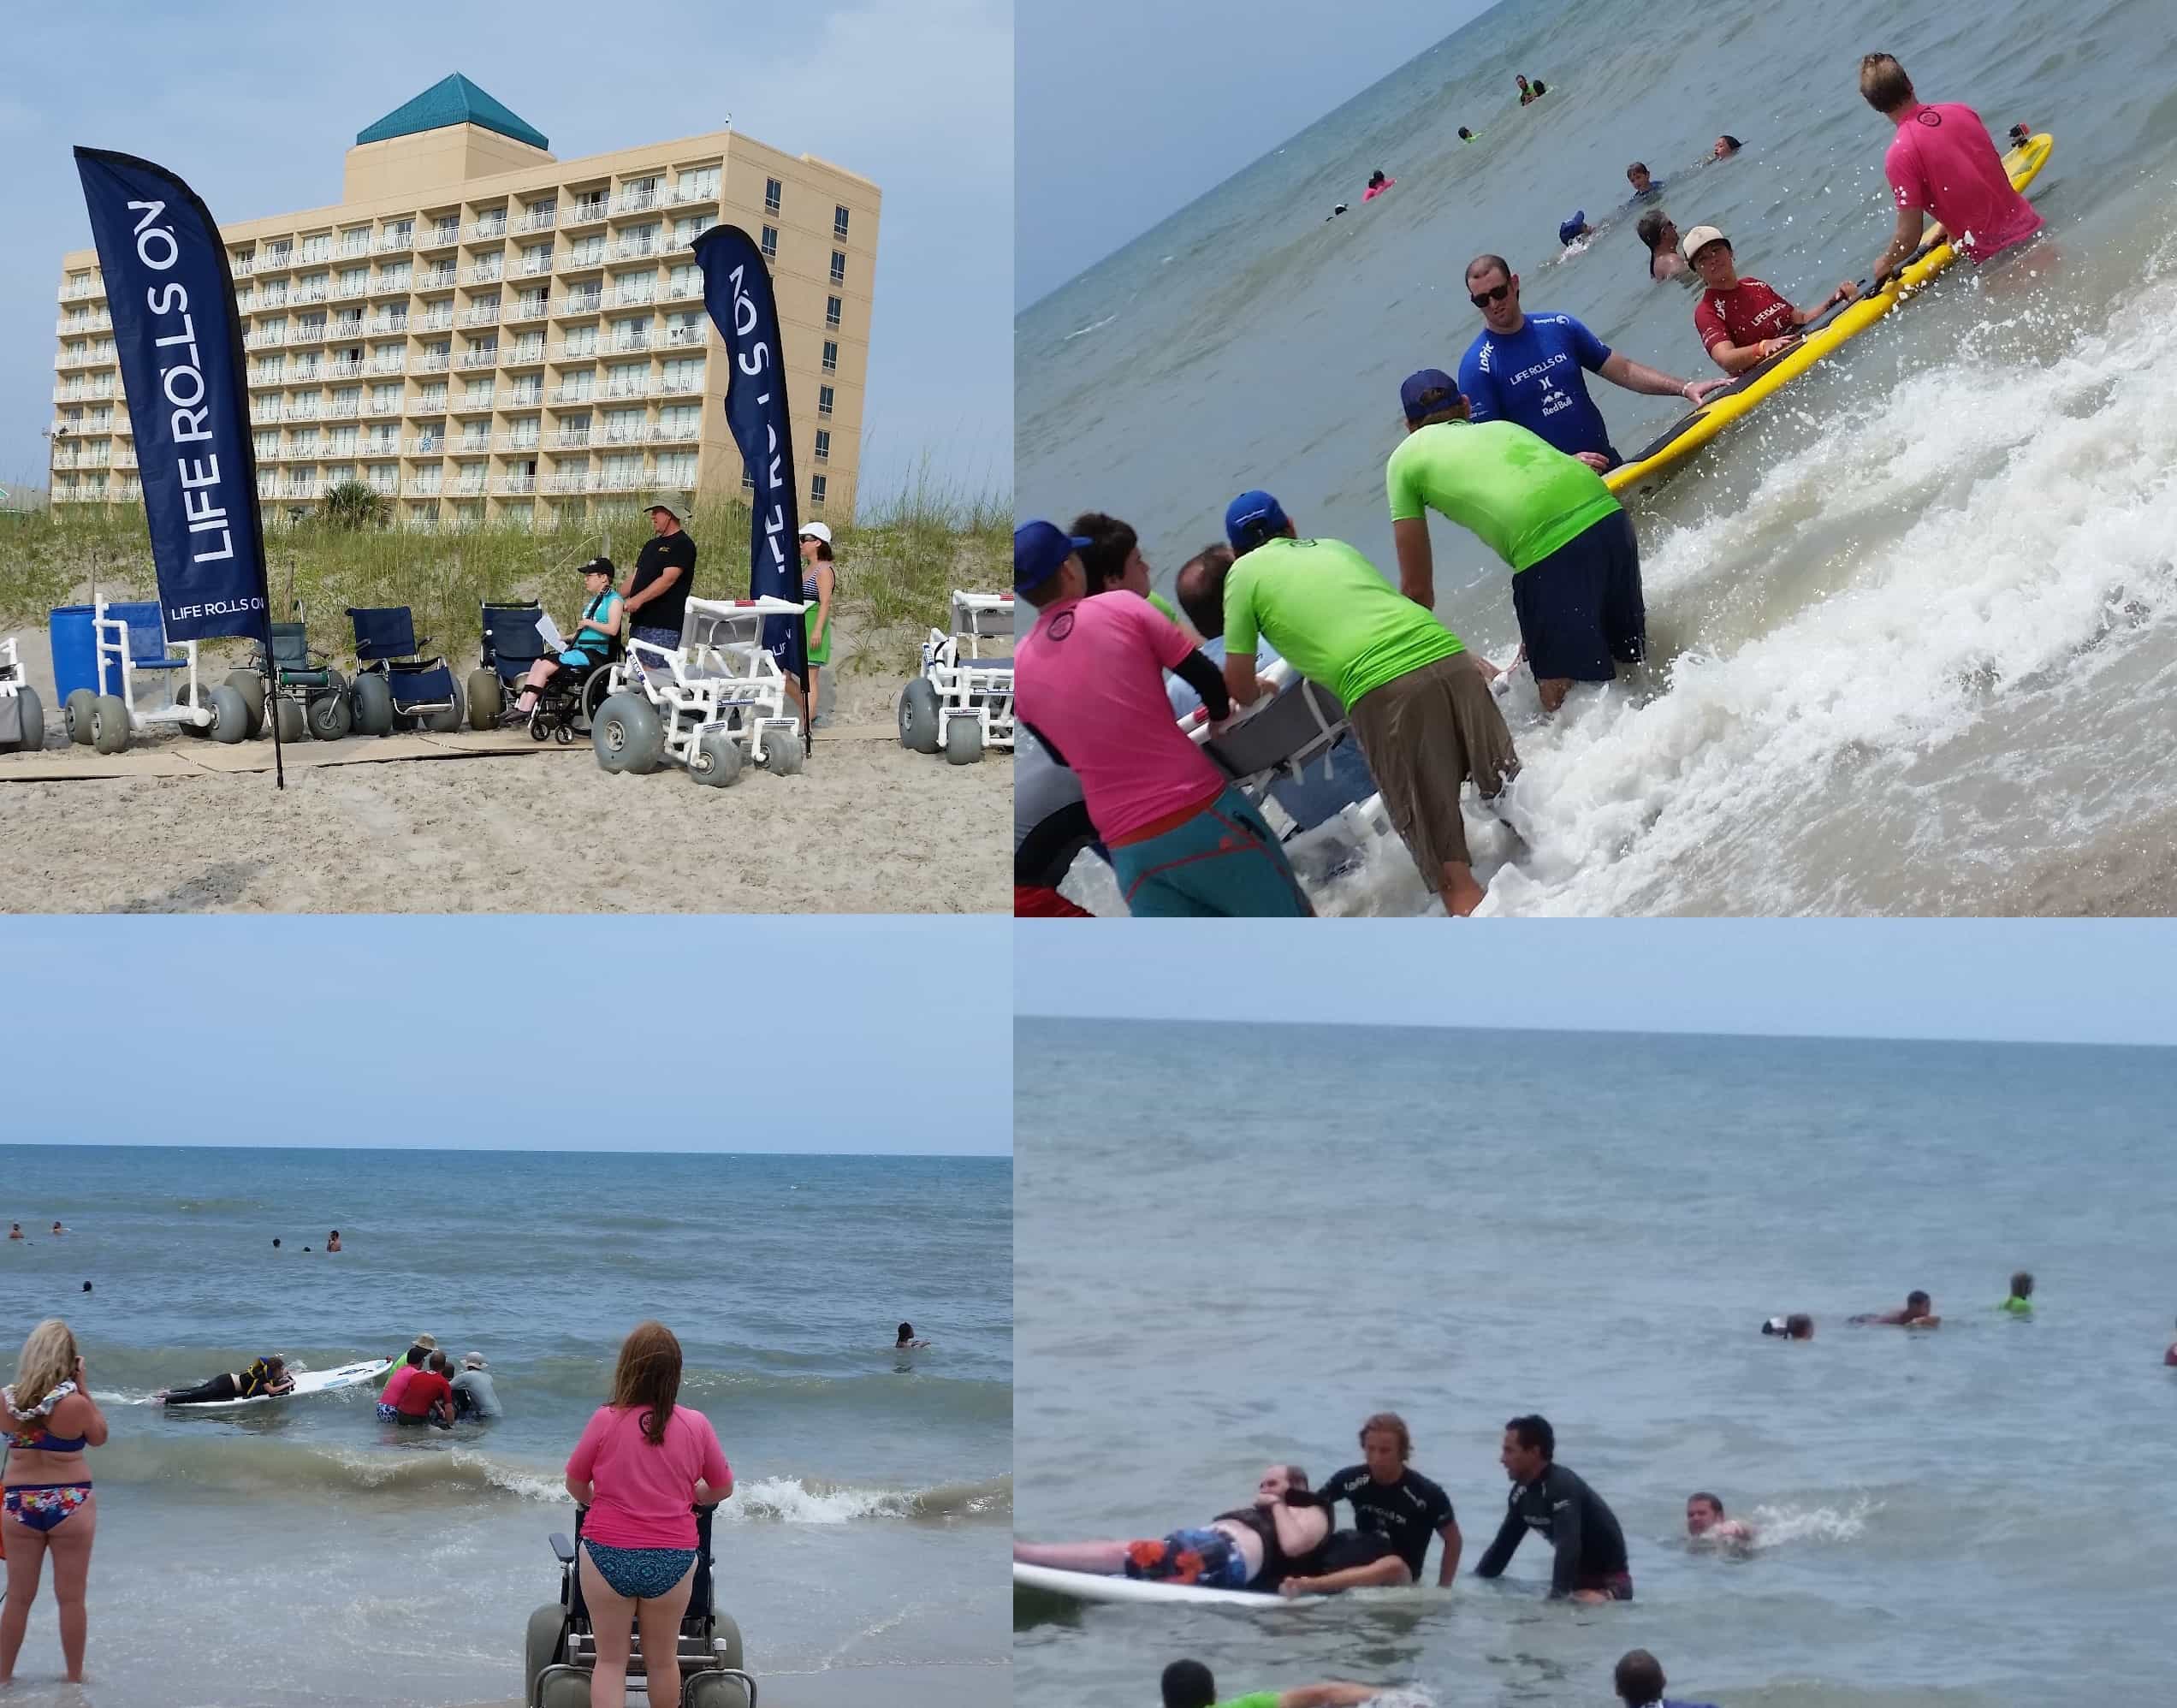 Each surfer was rolled down the water’s edge in a beach accessible wheelchair and then placed with a team and an adaptive surf board ready for fun!